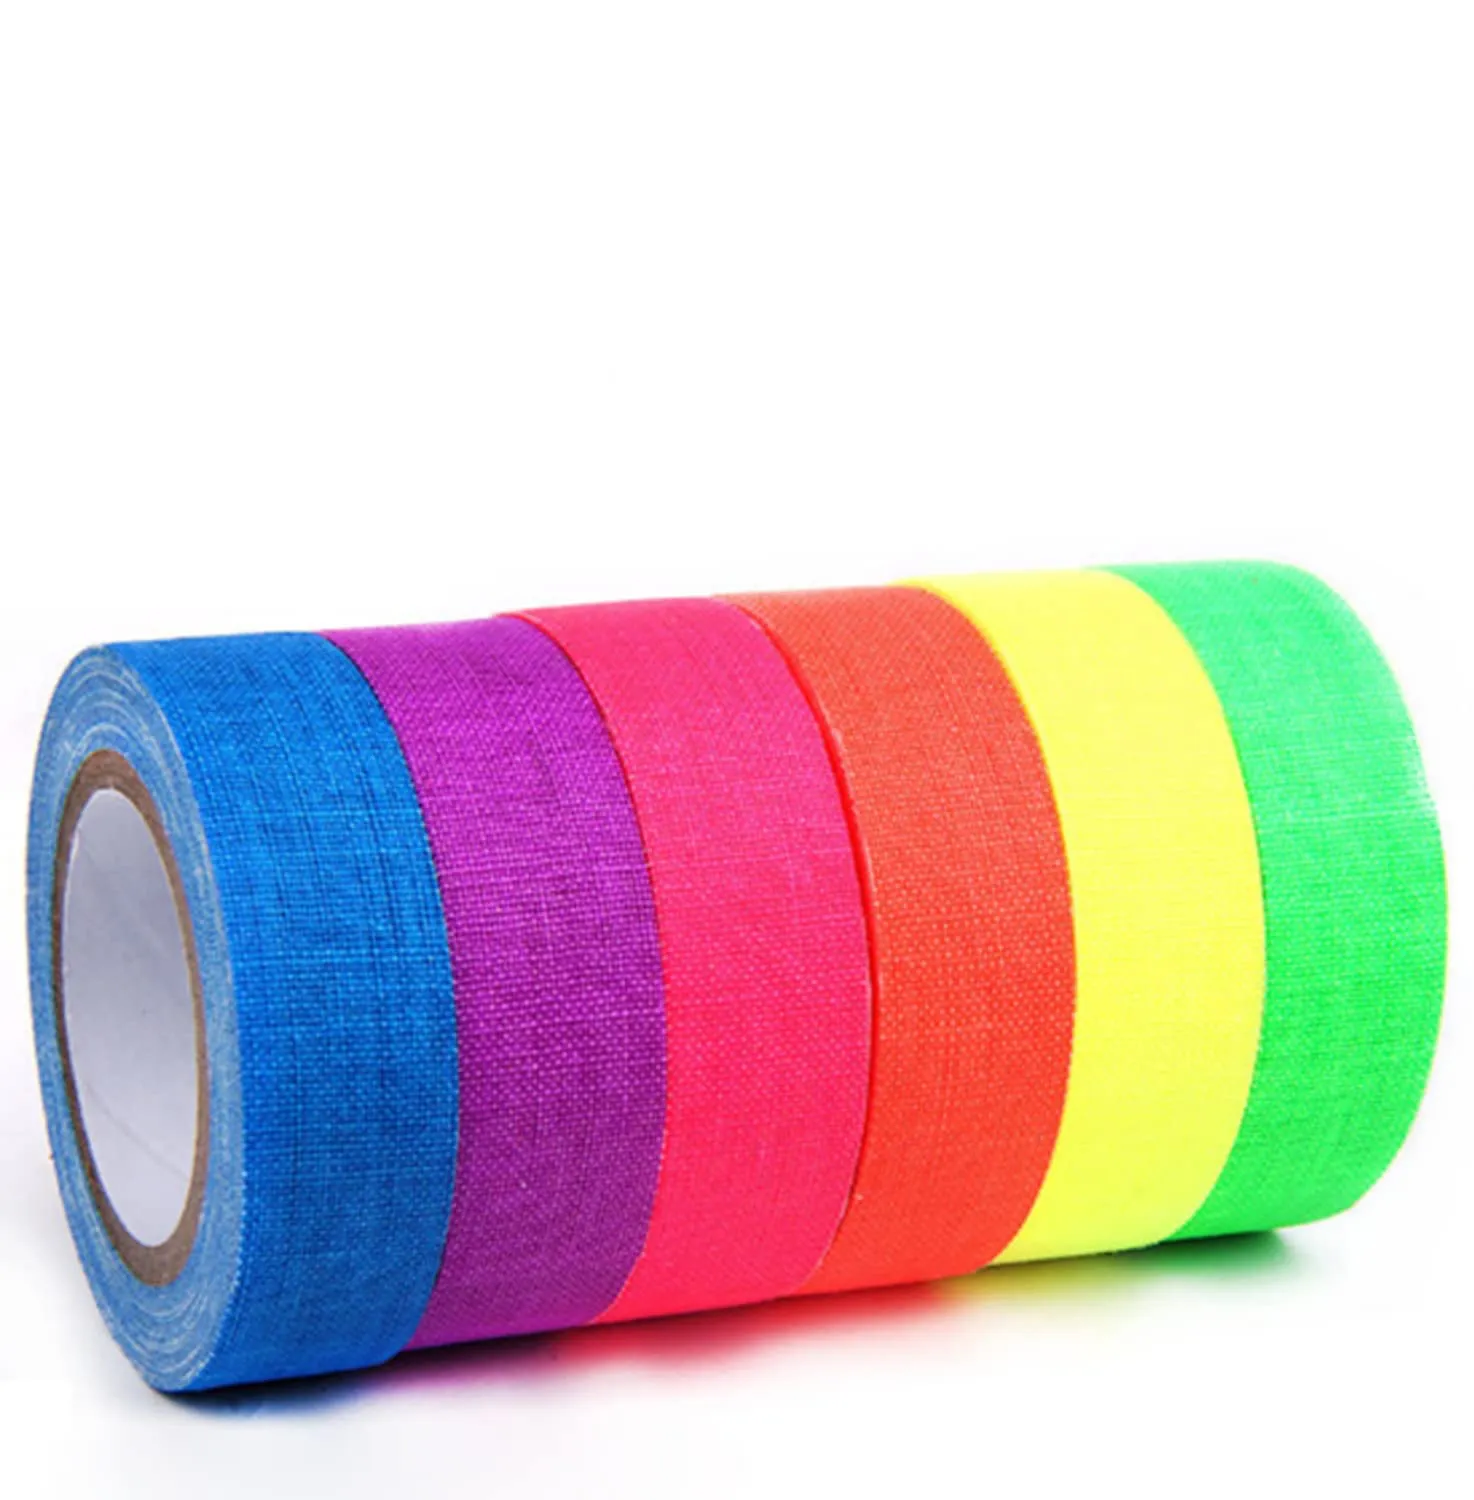 Single-Sided Gaffer Tape with Fluorescent Colors Waterproof Rubber Adhesive Masking Photography Pressure Sensitive